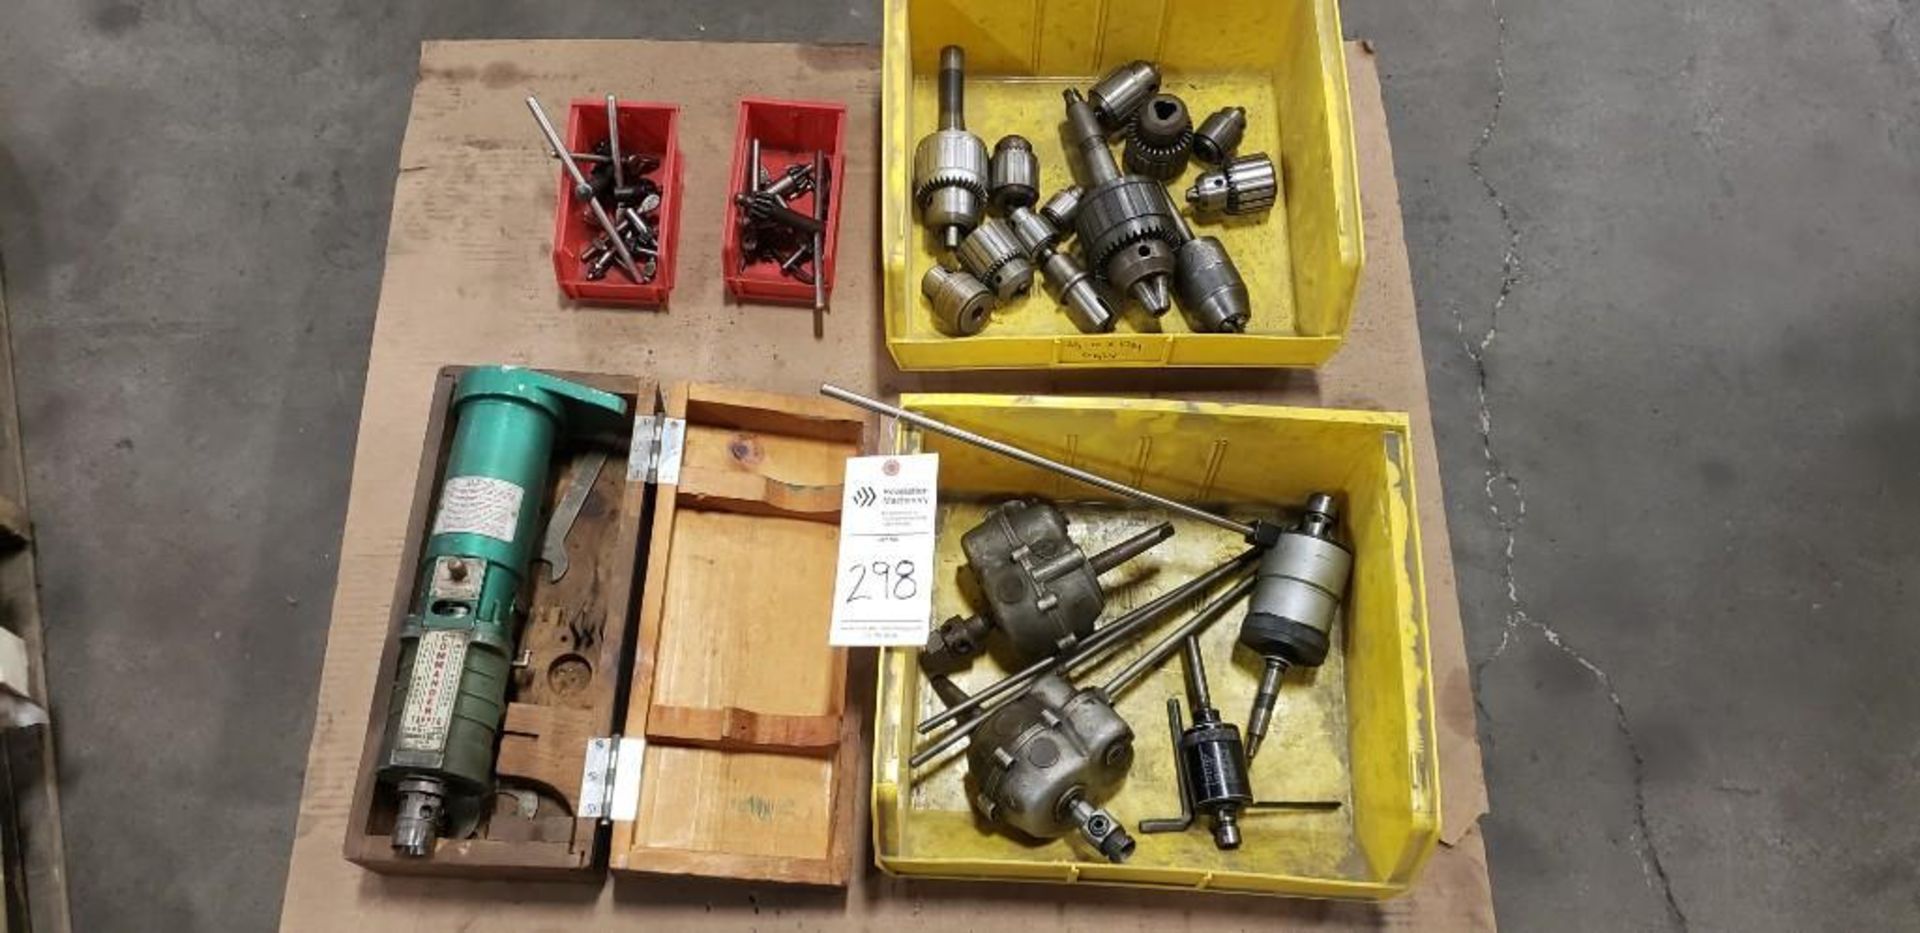 MILL TOOLING, TAPPING ATTACHMENTS, CHUCKS, COMMANDER TAPPER